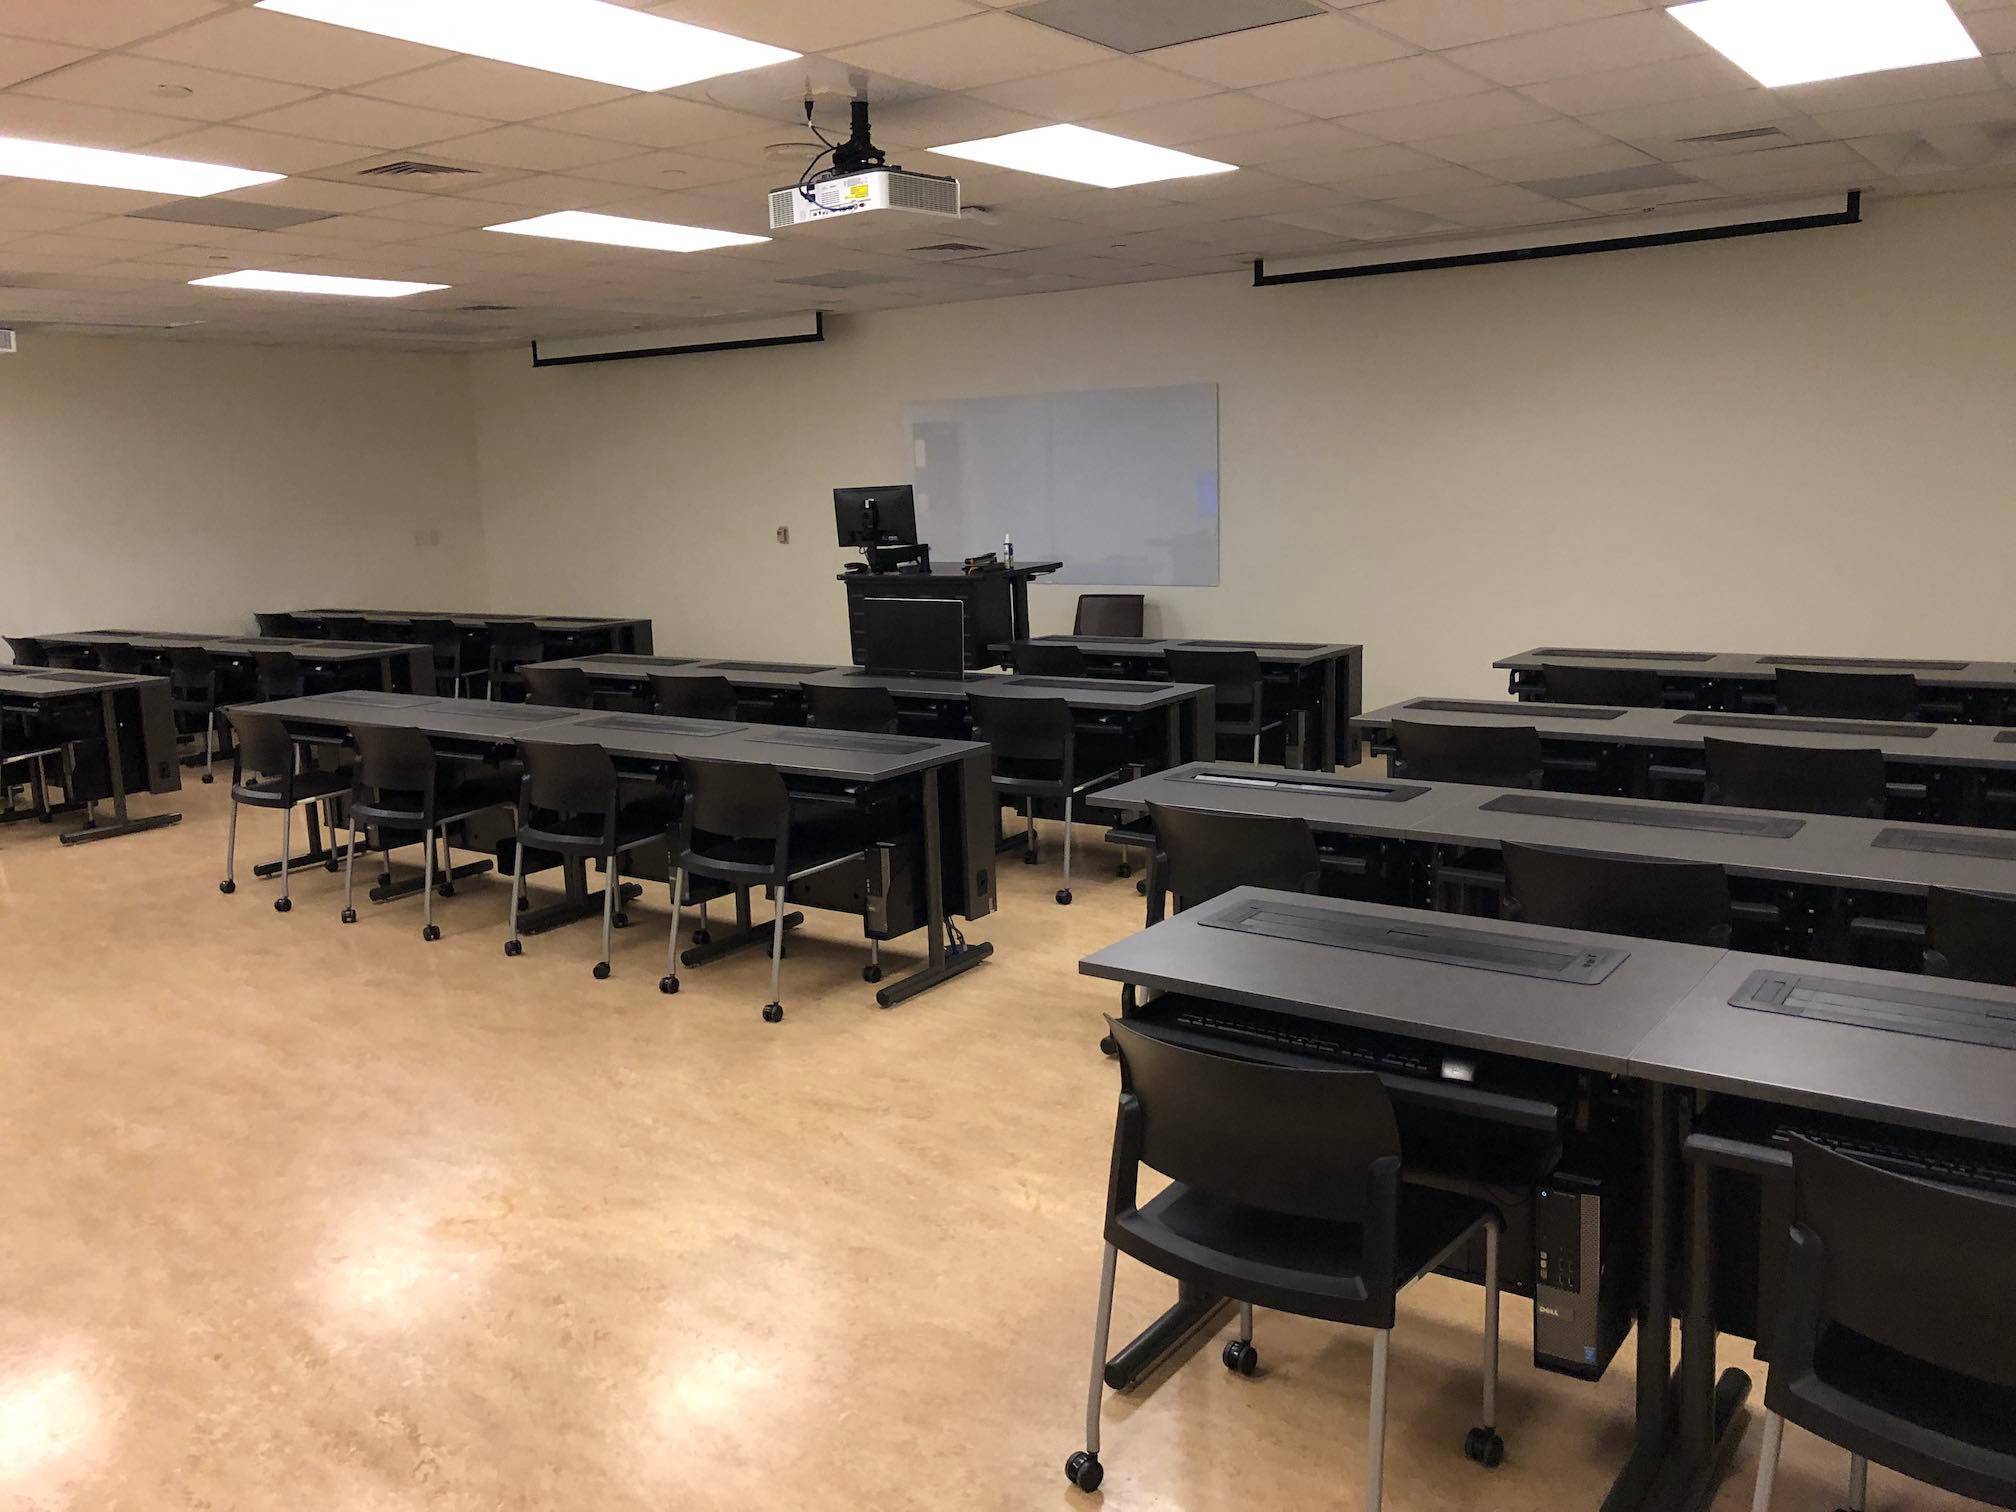 Image of the UAC 440 computer lab showing all 42 computer stations, projectors, and technology